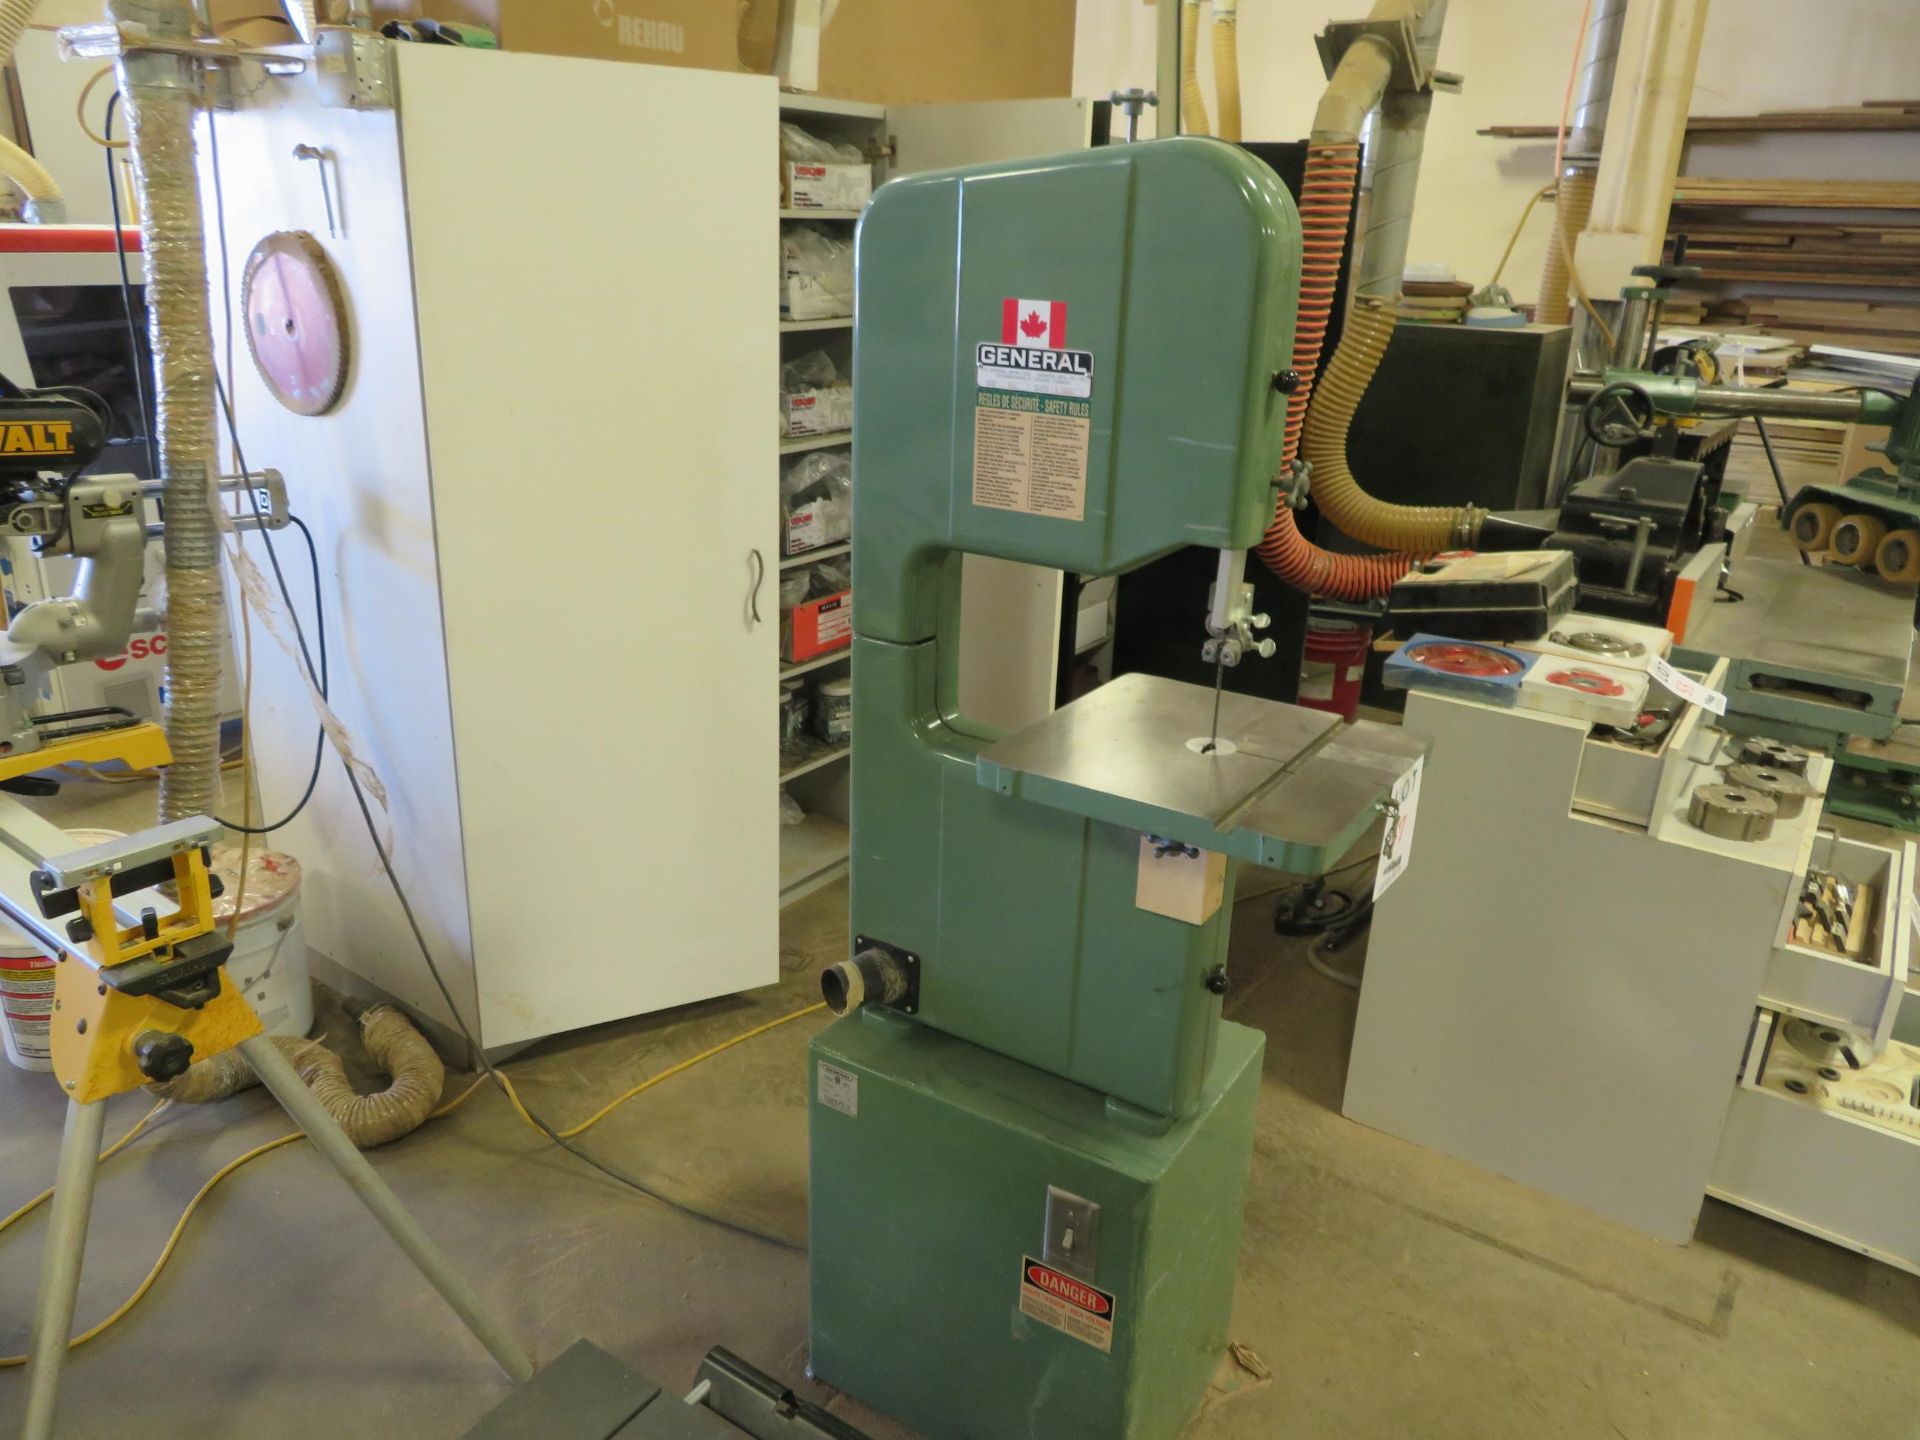 GENERAL band saw, Mod# 490. 3/4 HP, 115 Volt, 60 HZ, 1 PH - Image 4 of 4